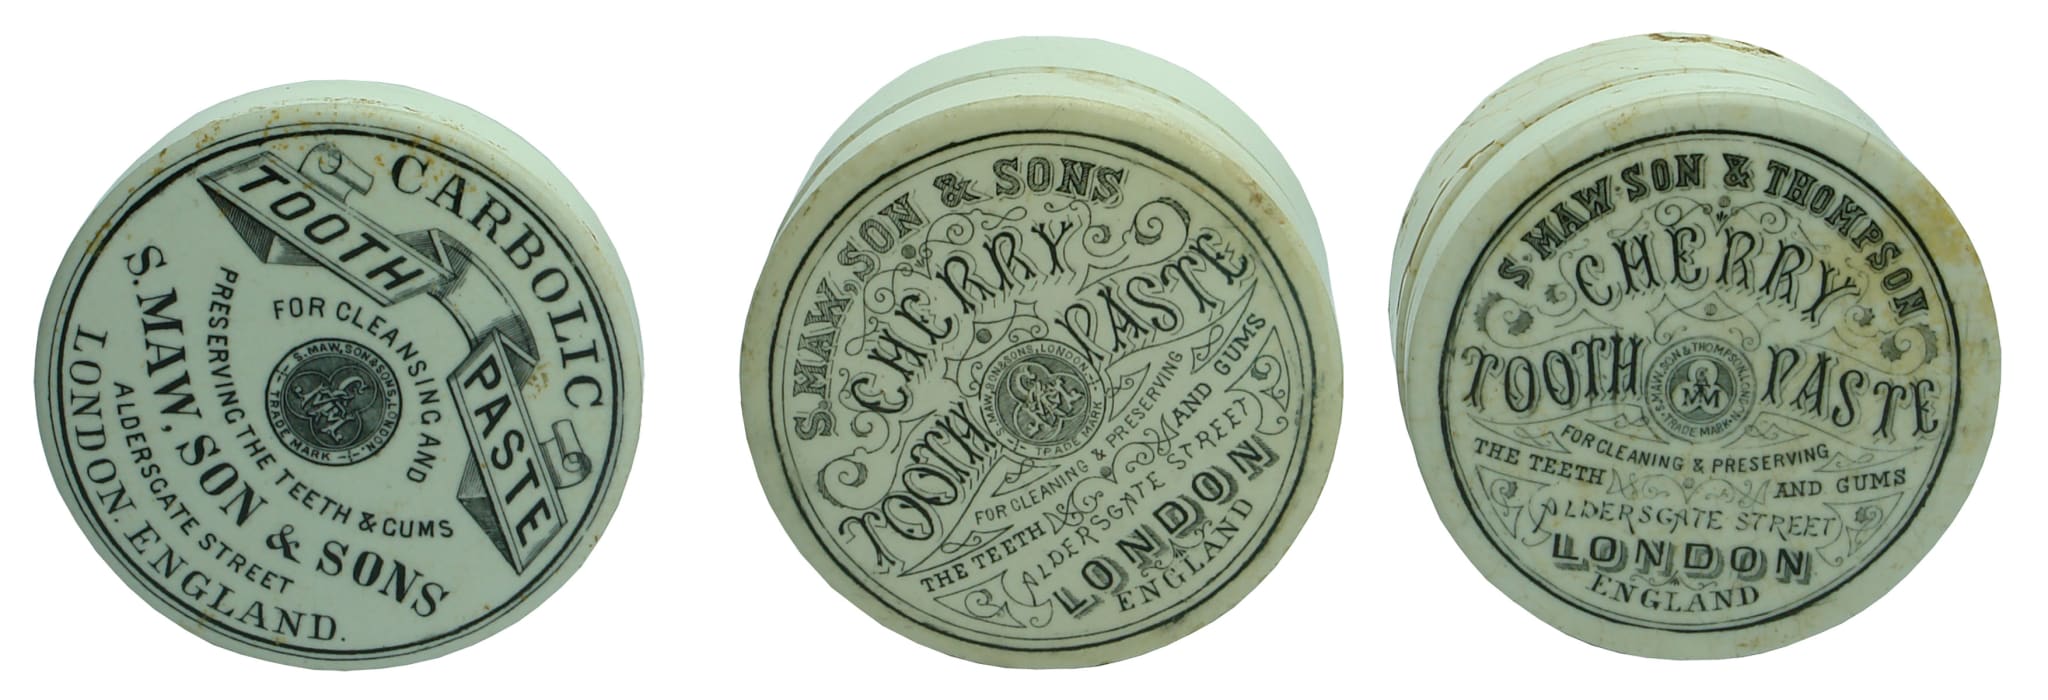 Maw Sons Tooth Paste Pots Lids